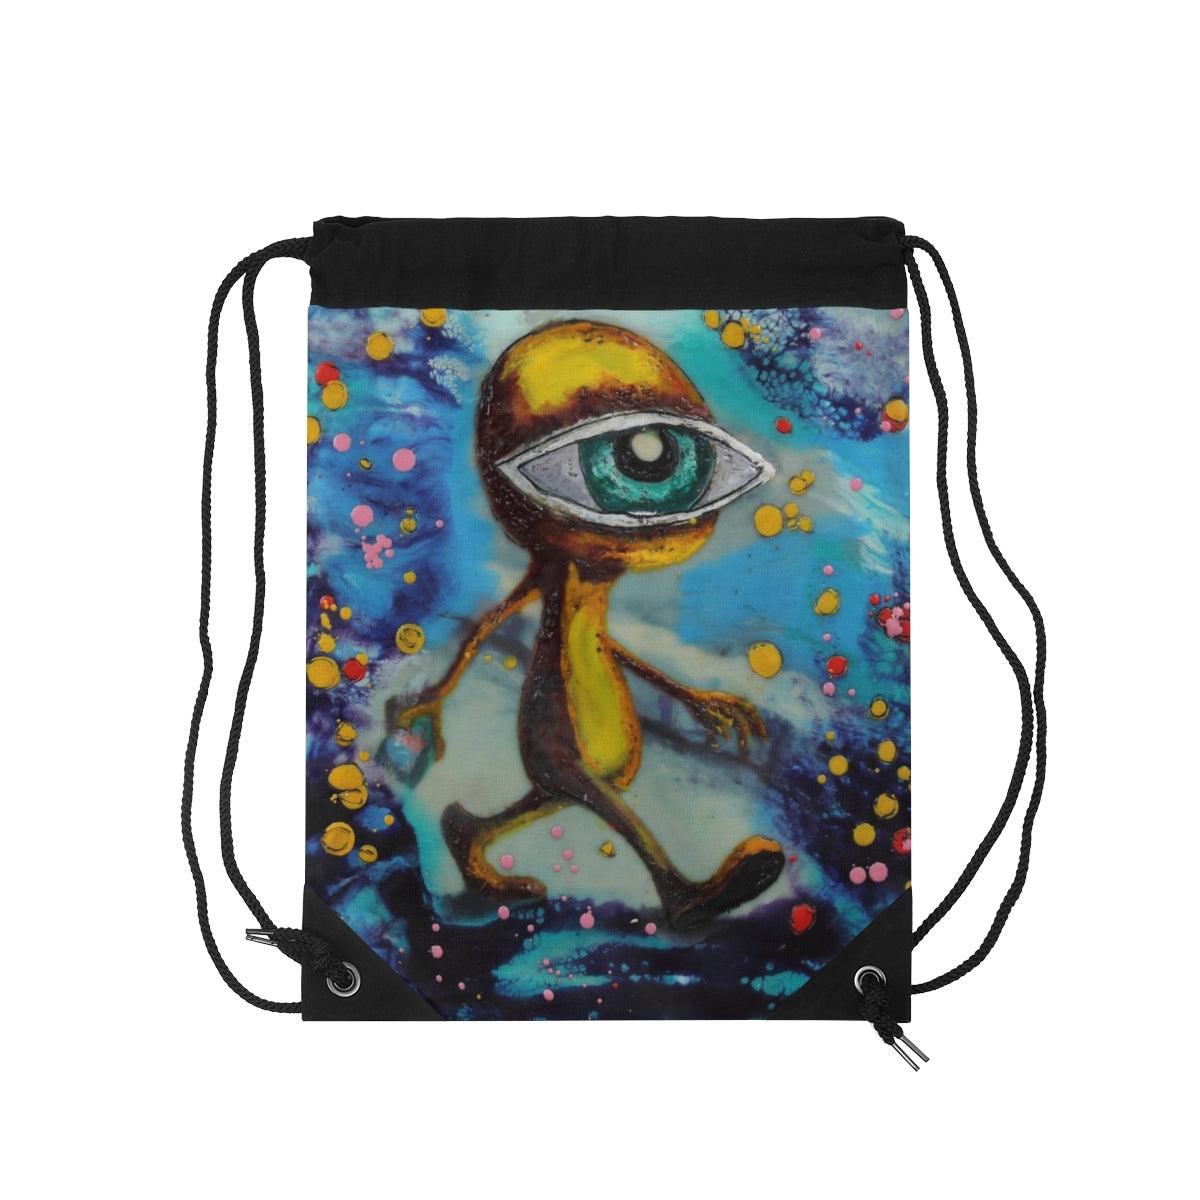 "I Took The Red Pill" Drawstring Bag-Bags - Mike Giannella - Encaustic Painting - Mixed Media Artist - Art Prints